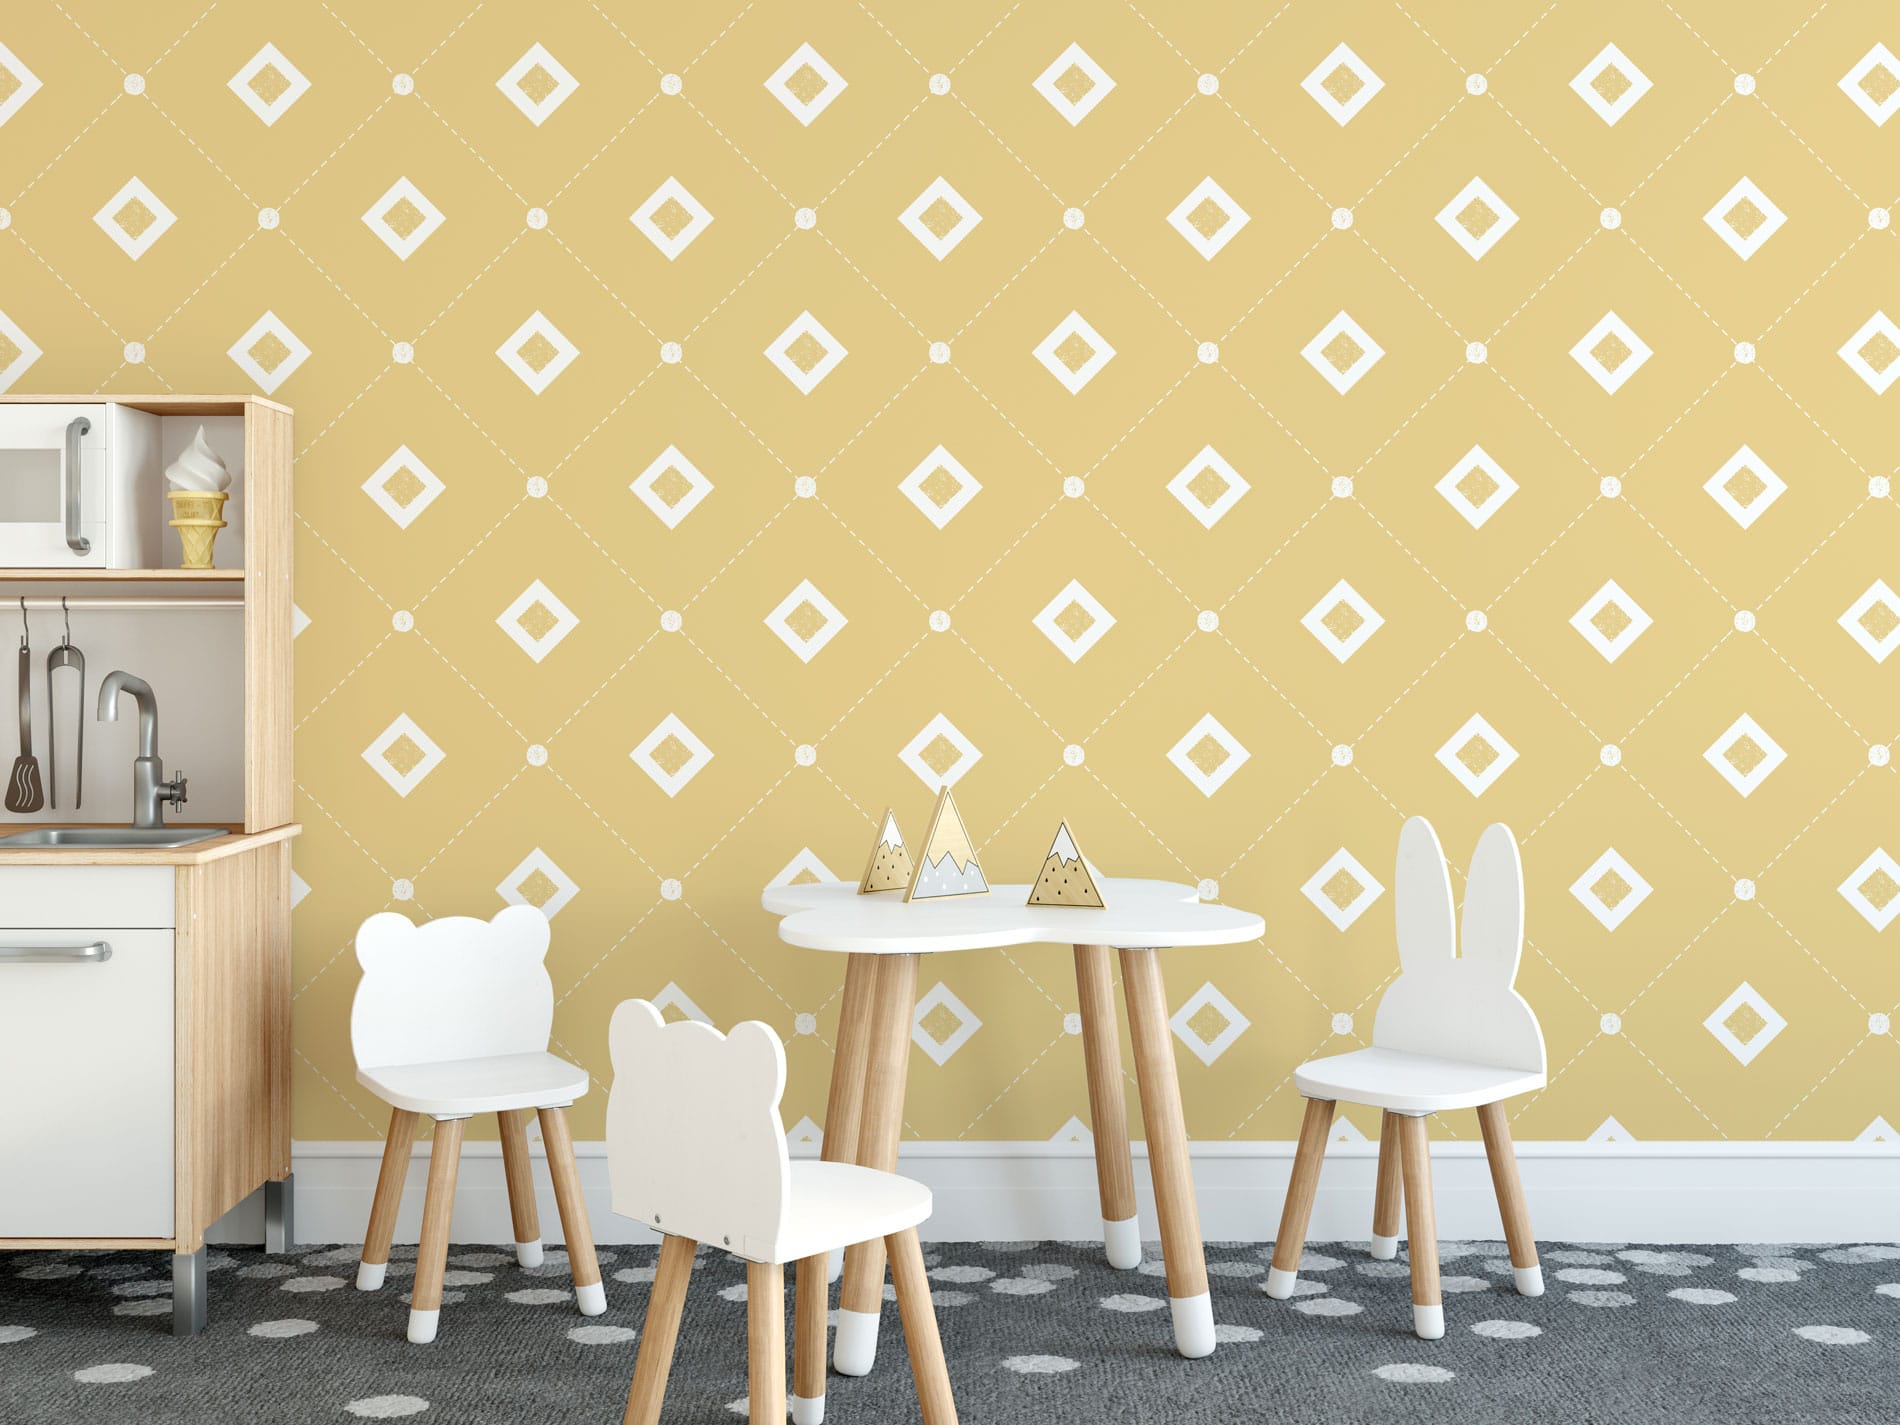 Retro tile diamond pattern wallpaper - Peel and Stick or Non-Pasted